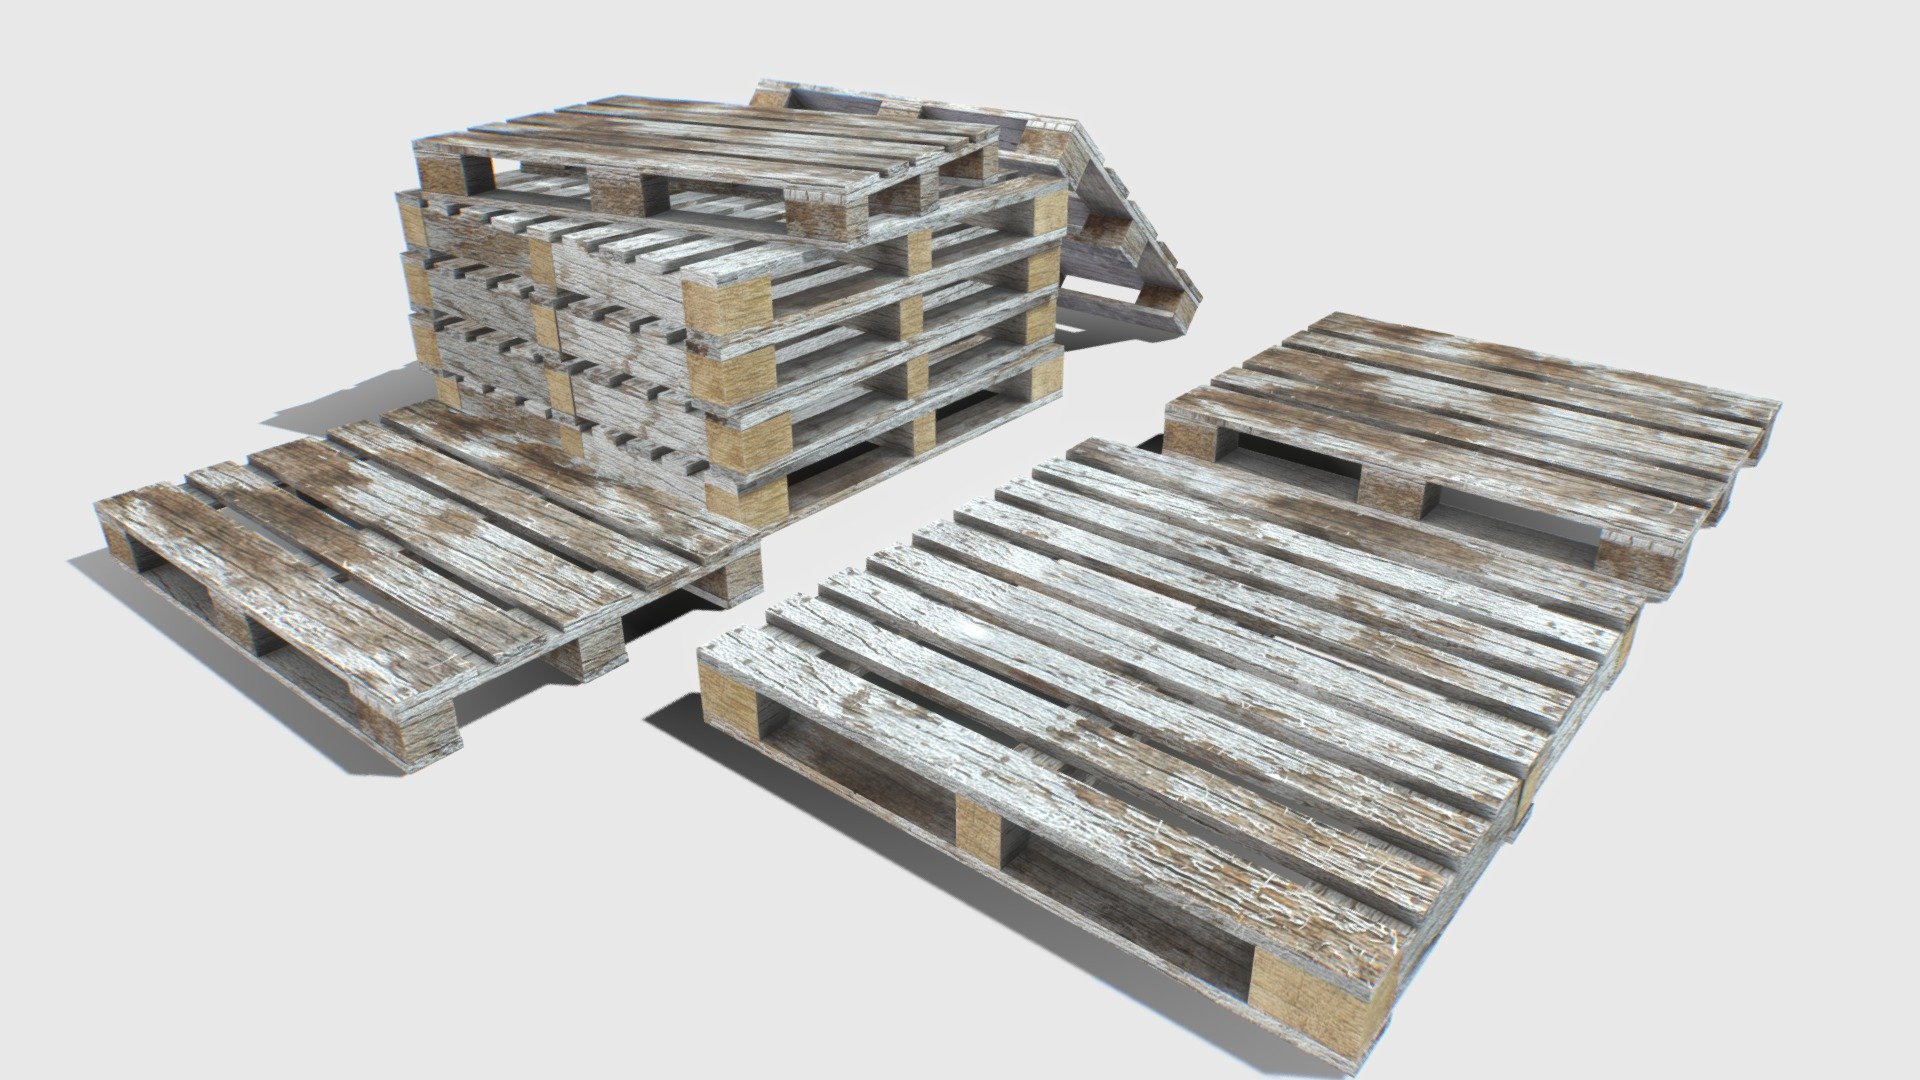 Industrial pallets based in real ones. 3 pallets included: 1200x1200 1200x1000 and 1200x800 cm.

Comes with 1 set of PBR 4096p textures including Albedo, Normal, Roughness, Metalness and AO.

Suitable for factories, hangars, warehouses, construction sites, trucks, etc..

Realistic scale. Total verts 600, polys 1100

Pallet1 270verts.
Pallet2 160verts.
Pallet3 160verts 3d model